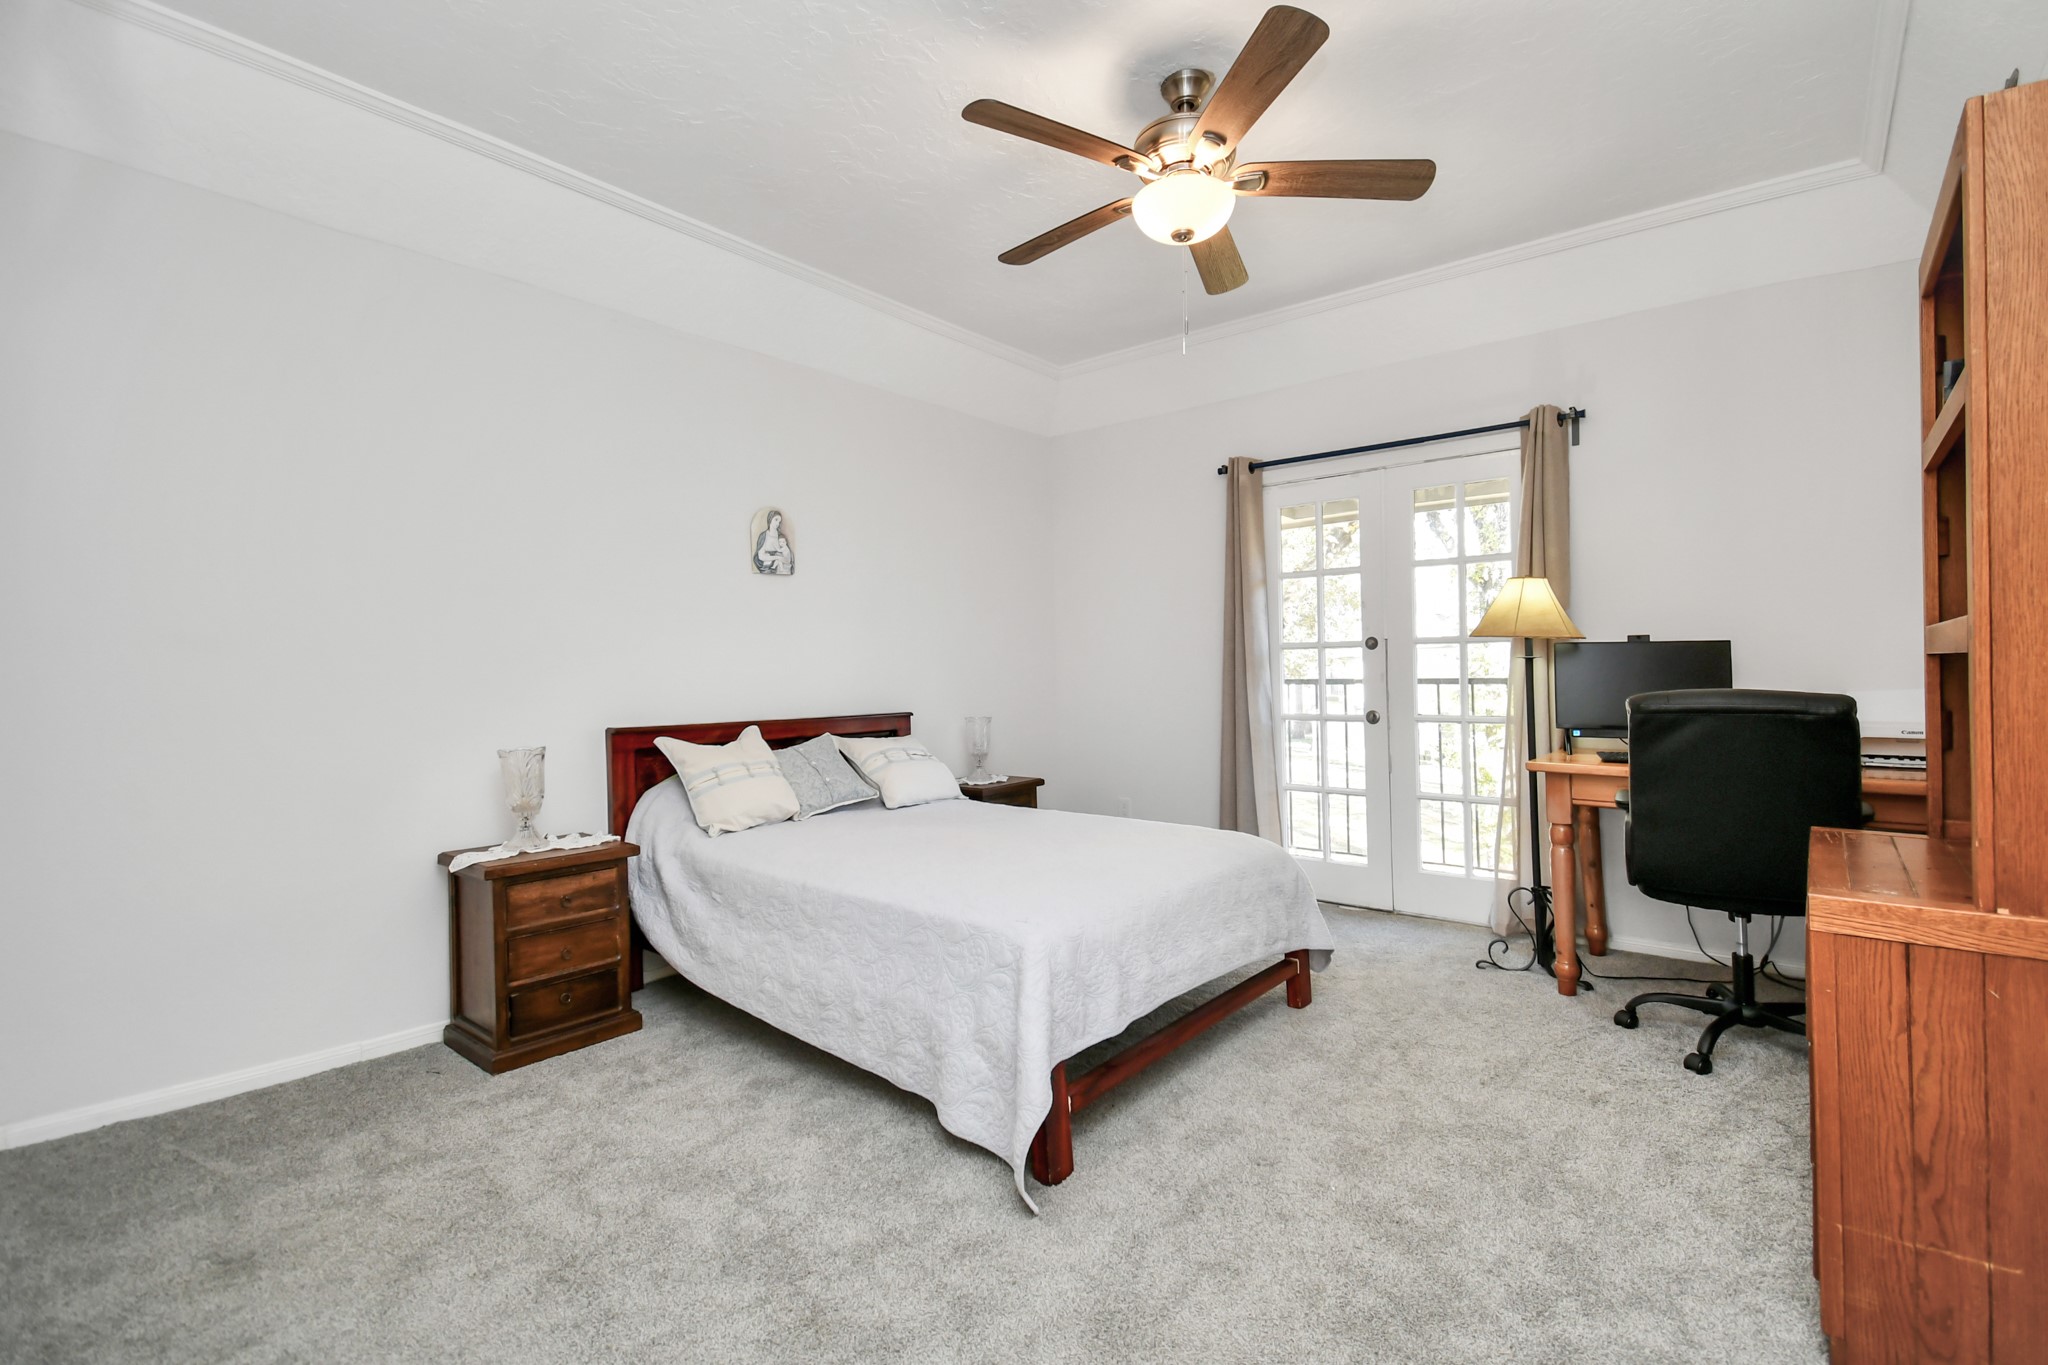 THIRD BEDROOM - Another very roomy bedroom upstairs.  Perfect for family or guests.